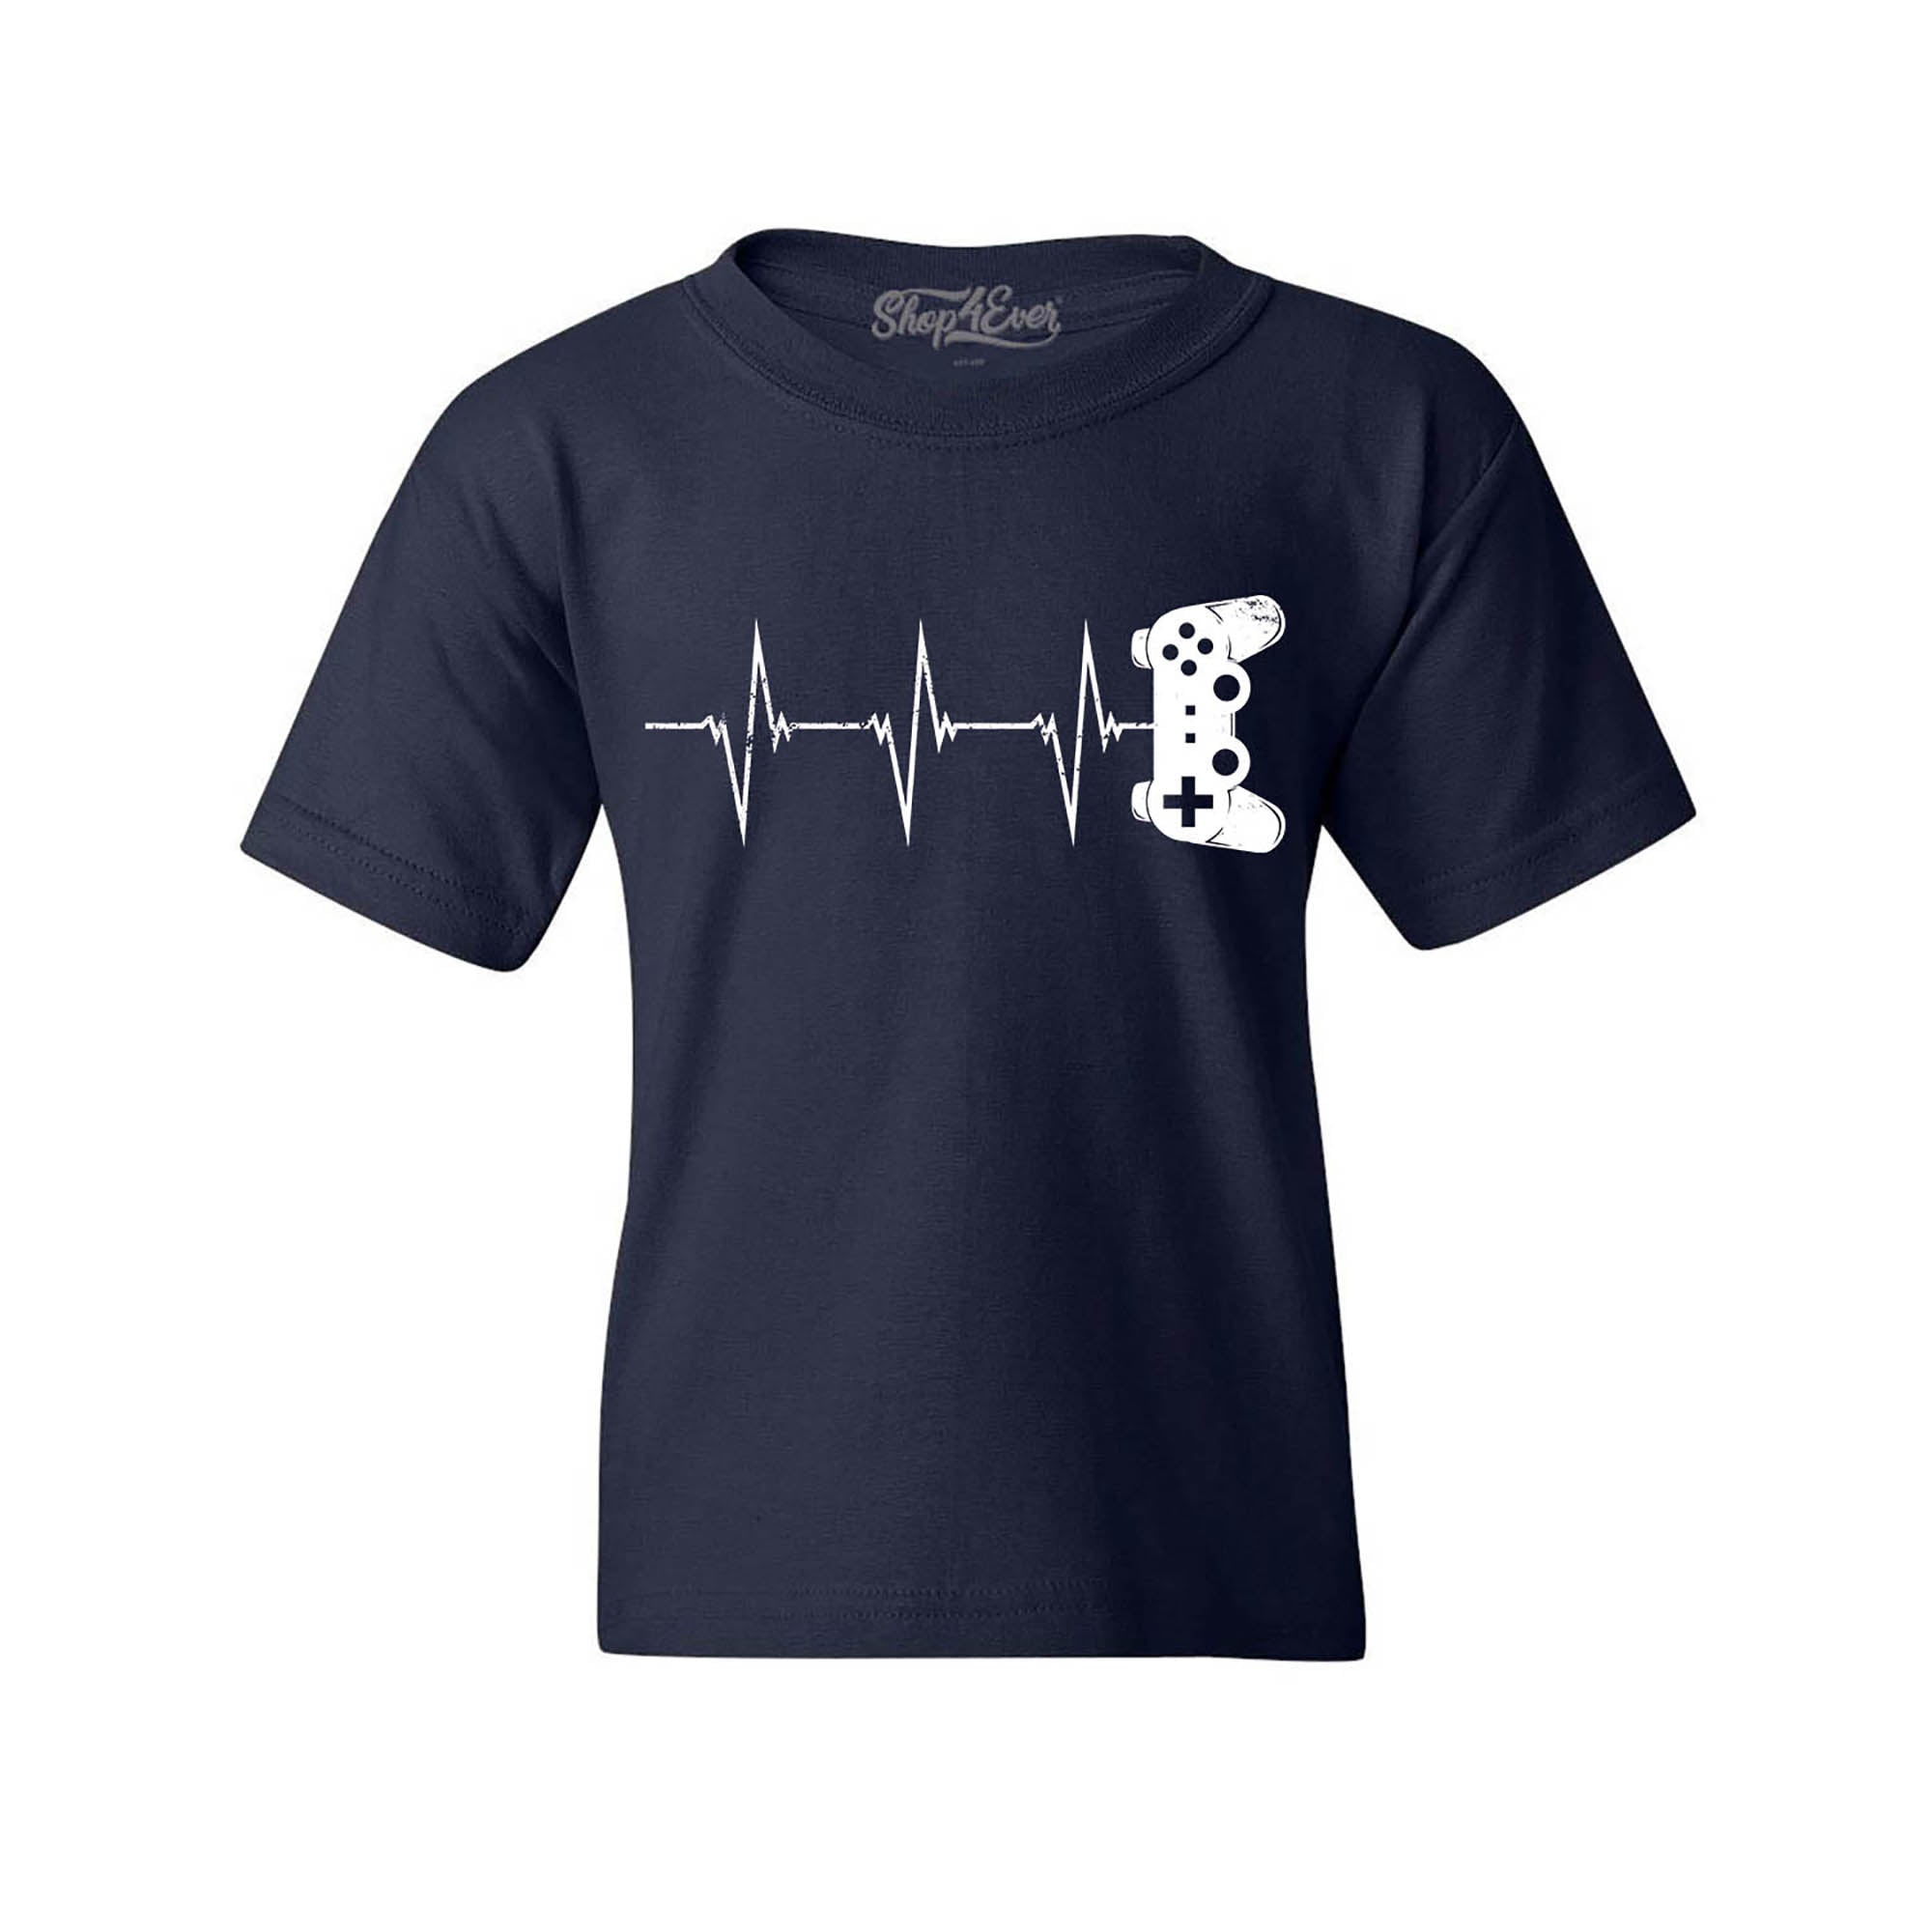 Gamer Heartbeat Boys Kids Child Video Game Youth's T-Shirt